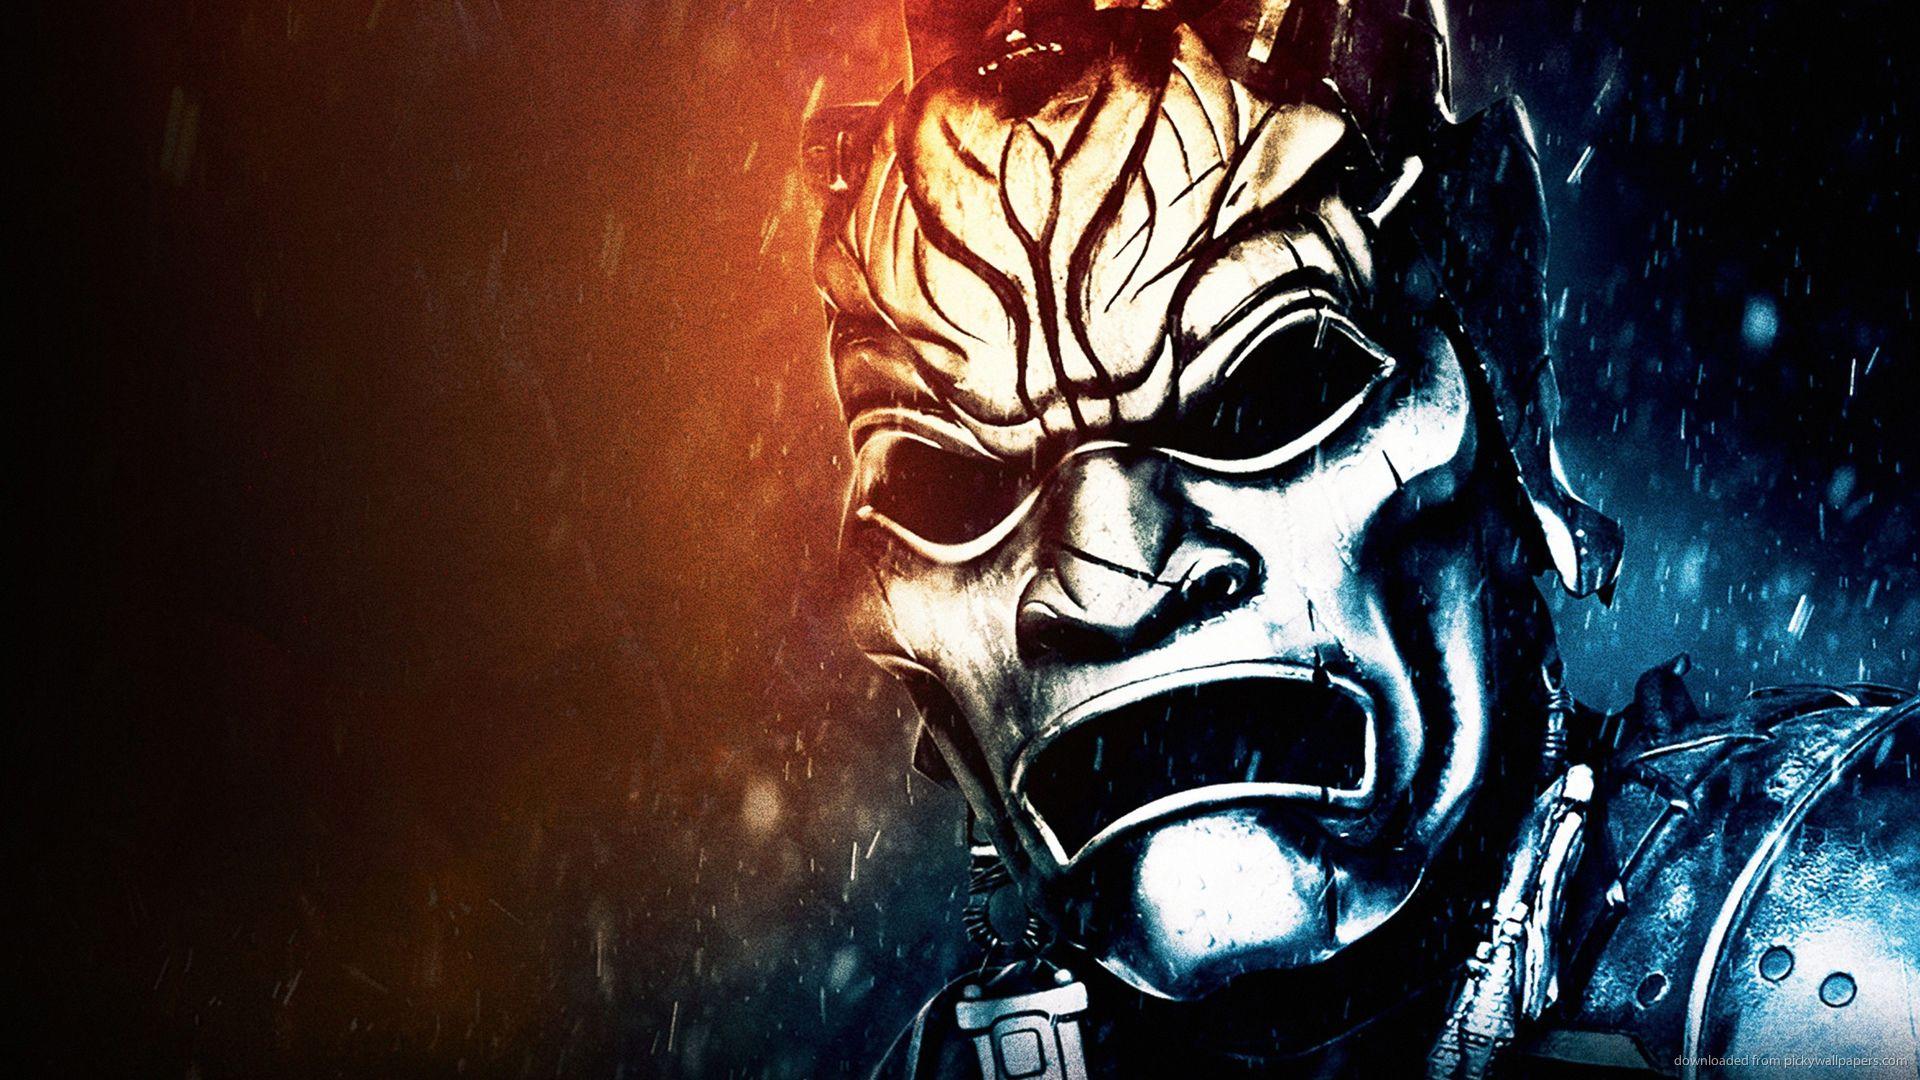 Download 1920x1080 Mask 300 Rise Of An Empire Wallpaper